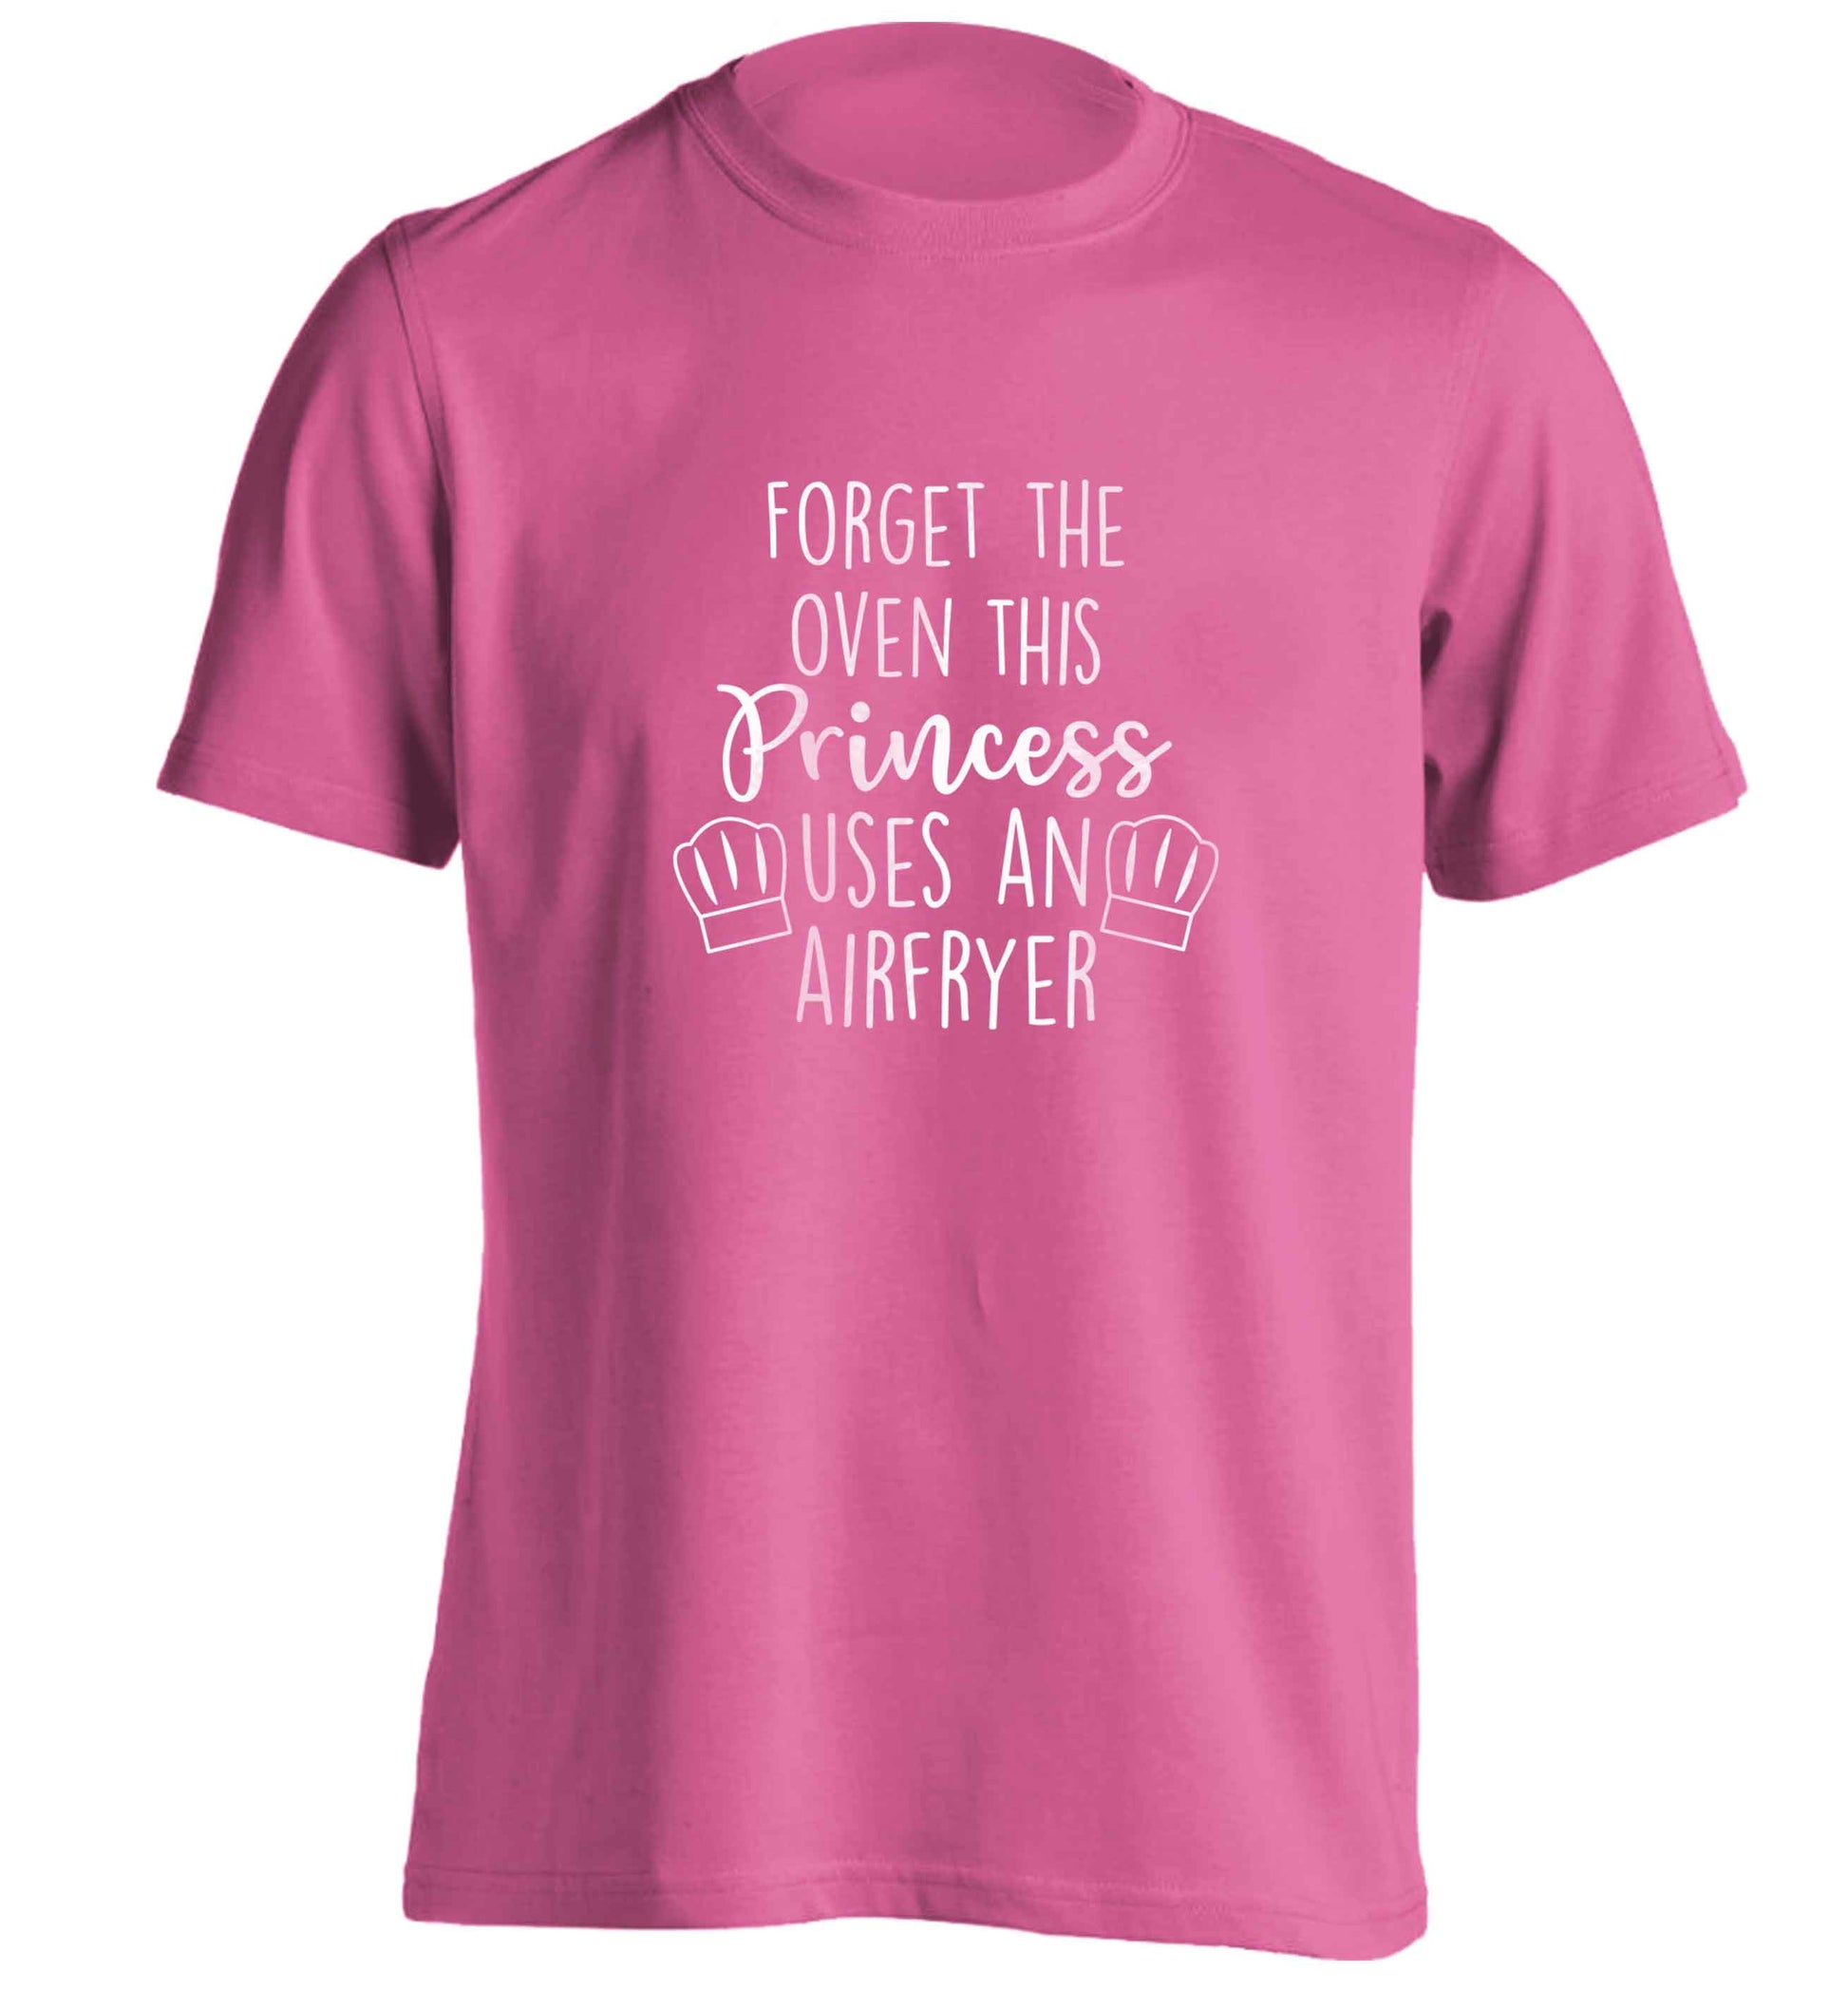 Forget the oven this princess uses an airfryeradults unisex pink Tshirt 2XL